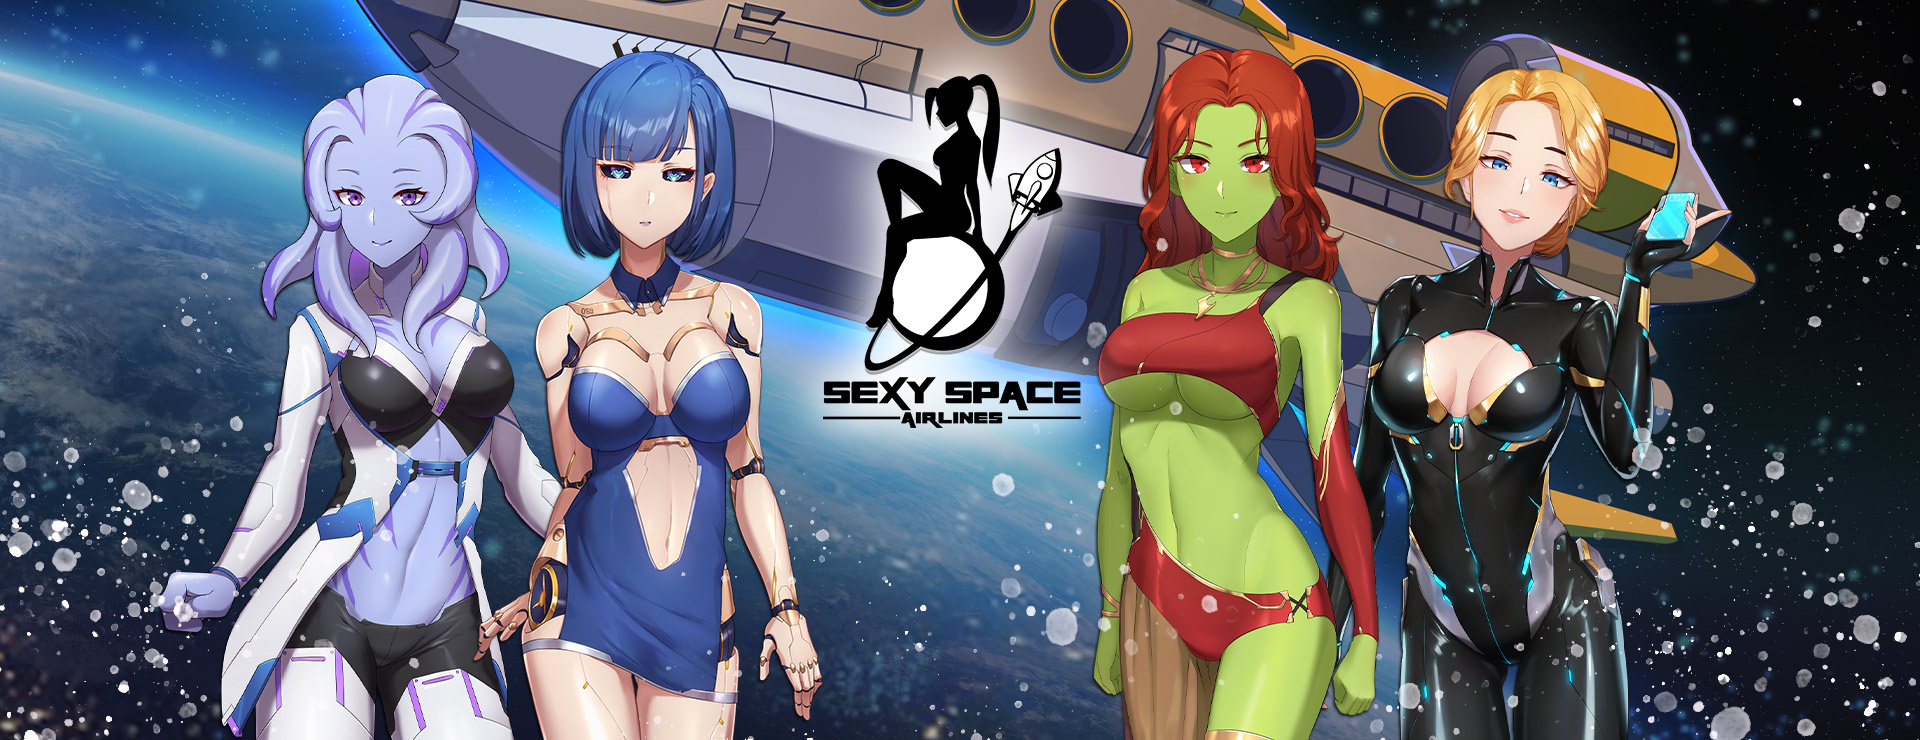 Sexy Space Airlines Game - 动作冒险游戏 遊戲